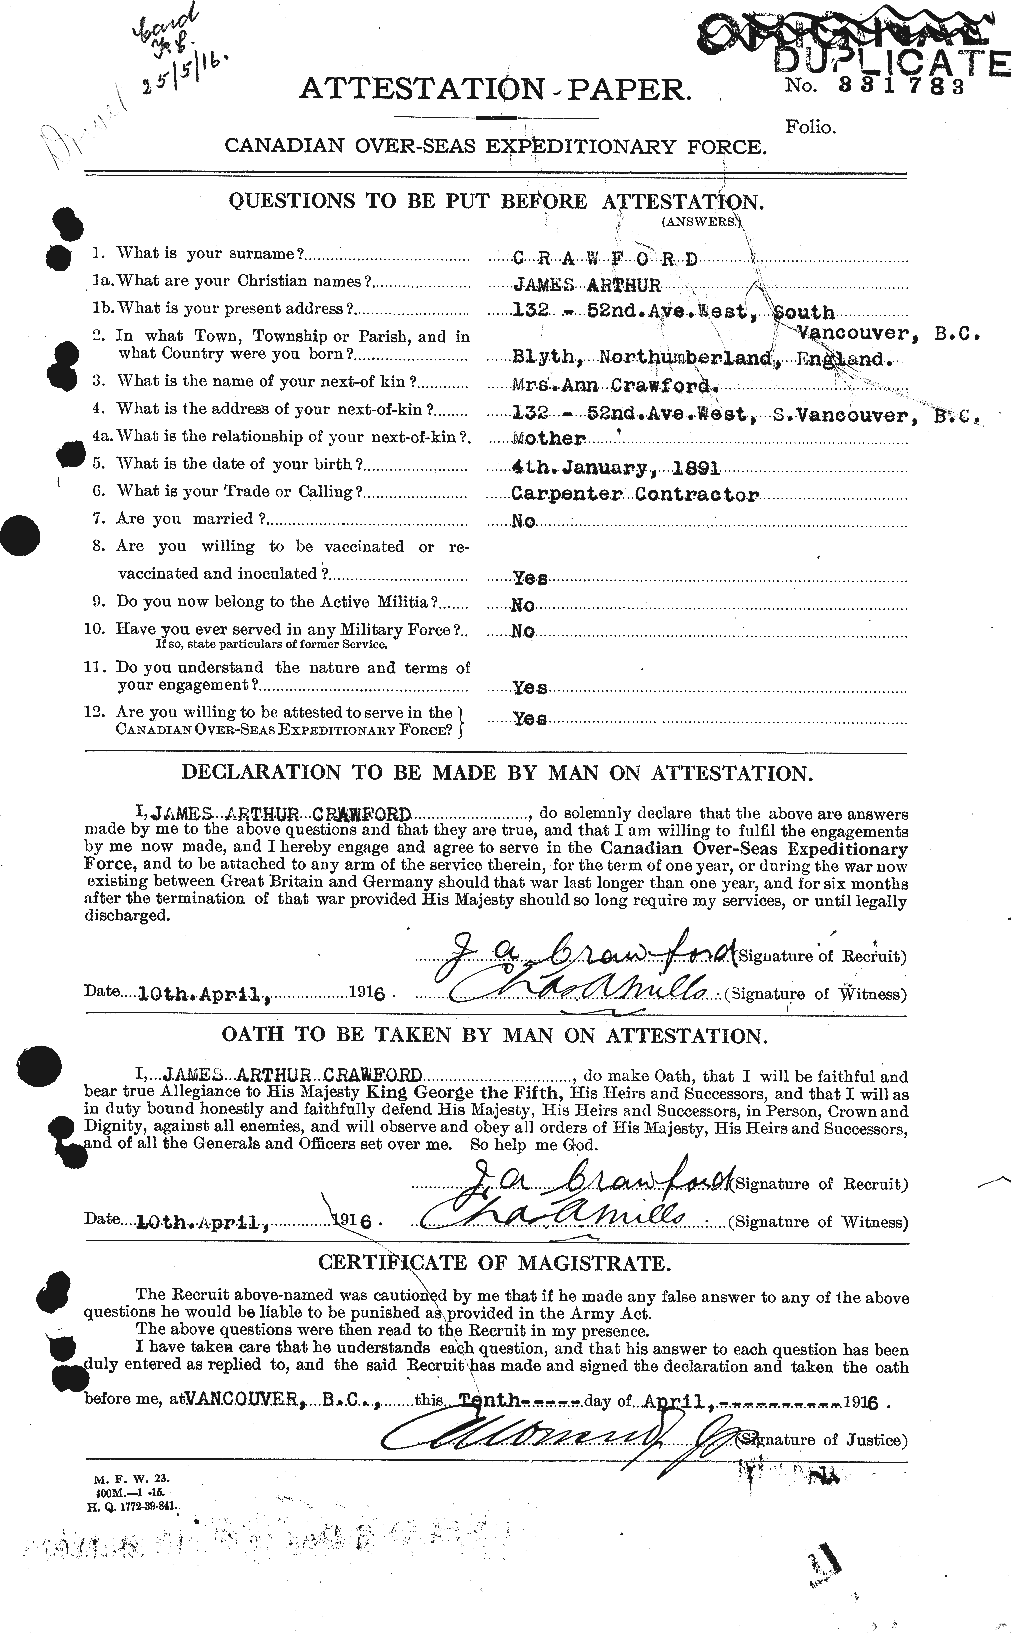 Personnel Records of the First World War - CEF 062760a